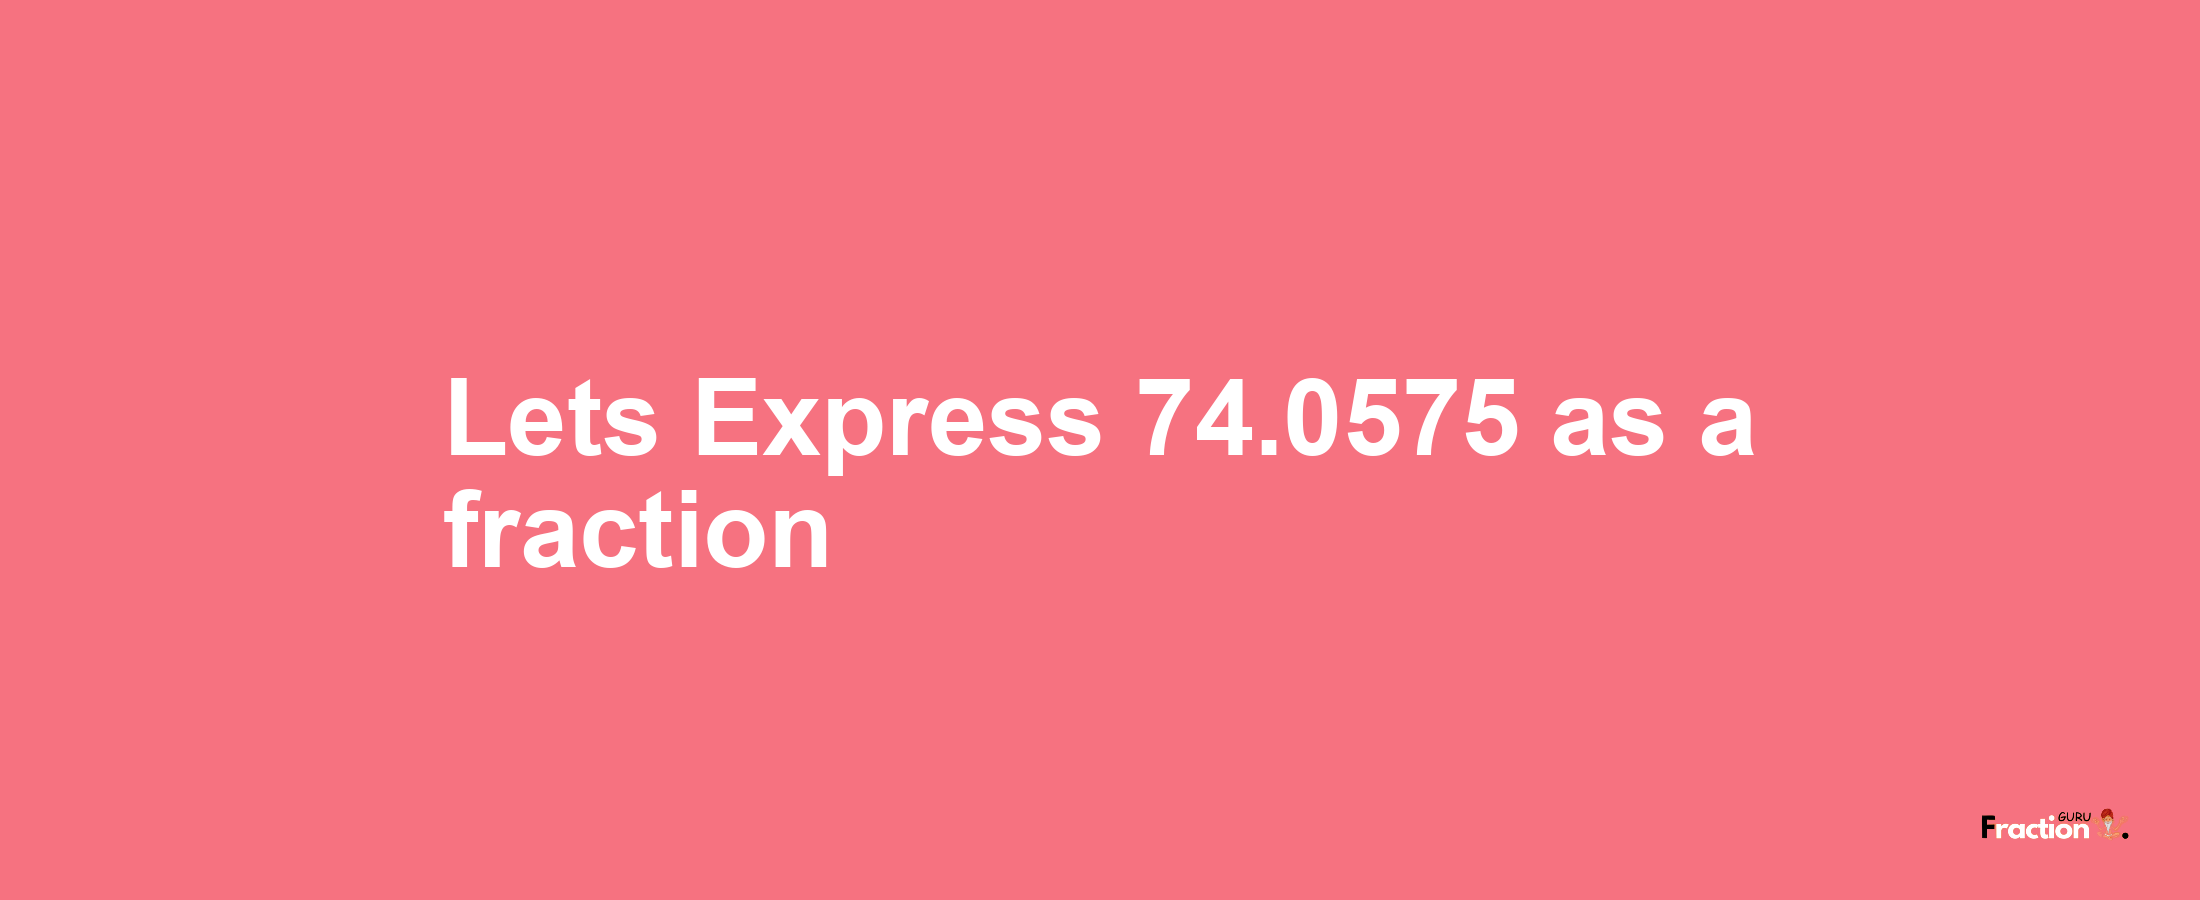 Lets Express 74.0575 as afraction